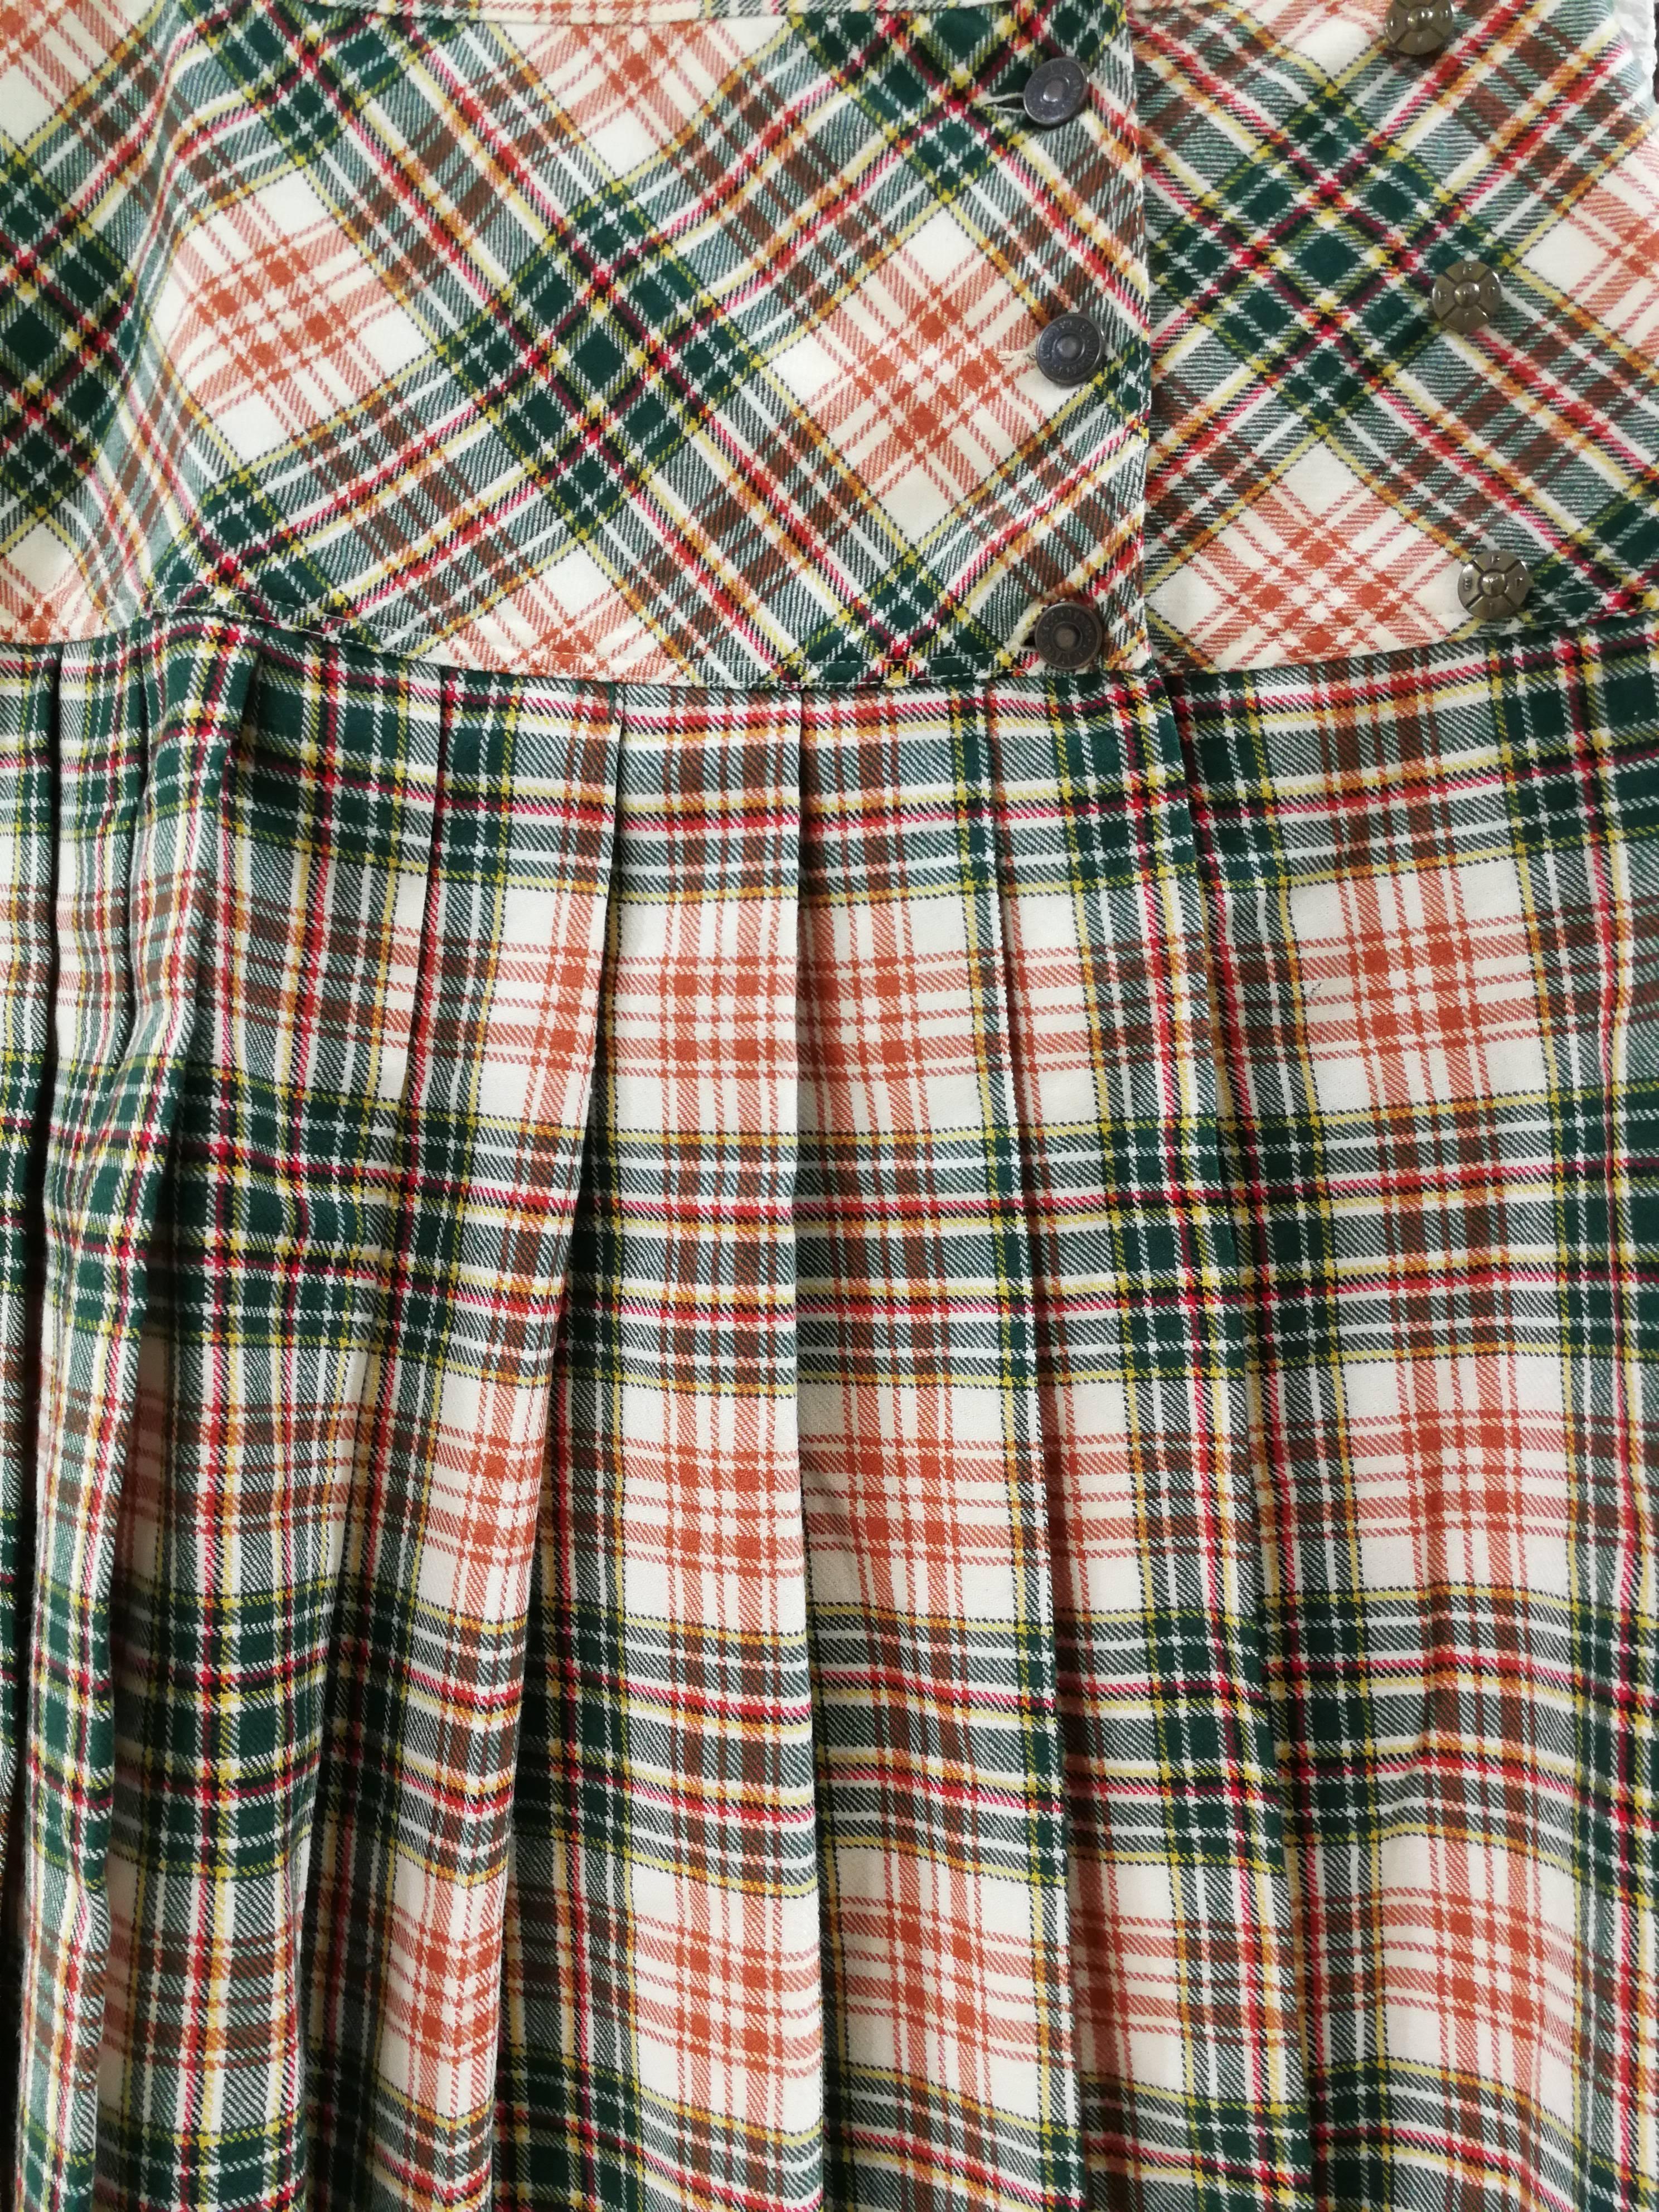 Fendi Wool Tartan Skirt

totally made in italy in size 42

Composition: Wool